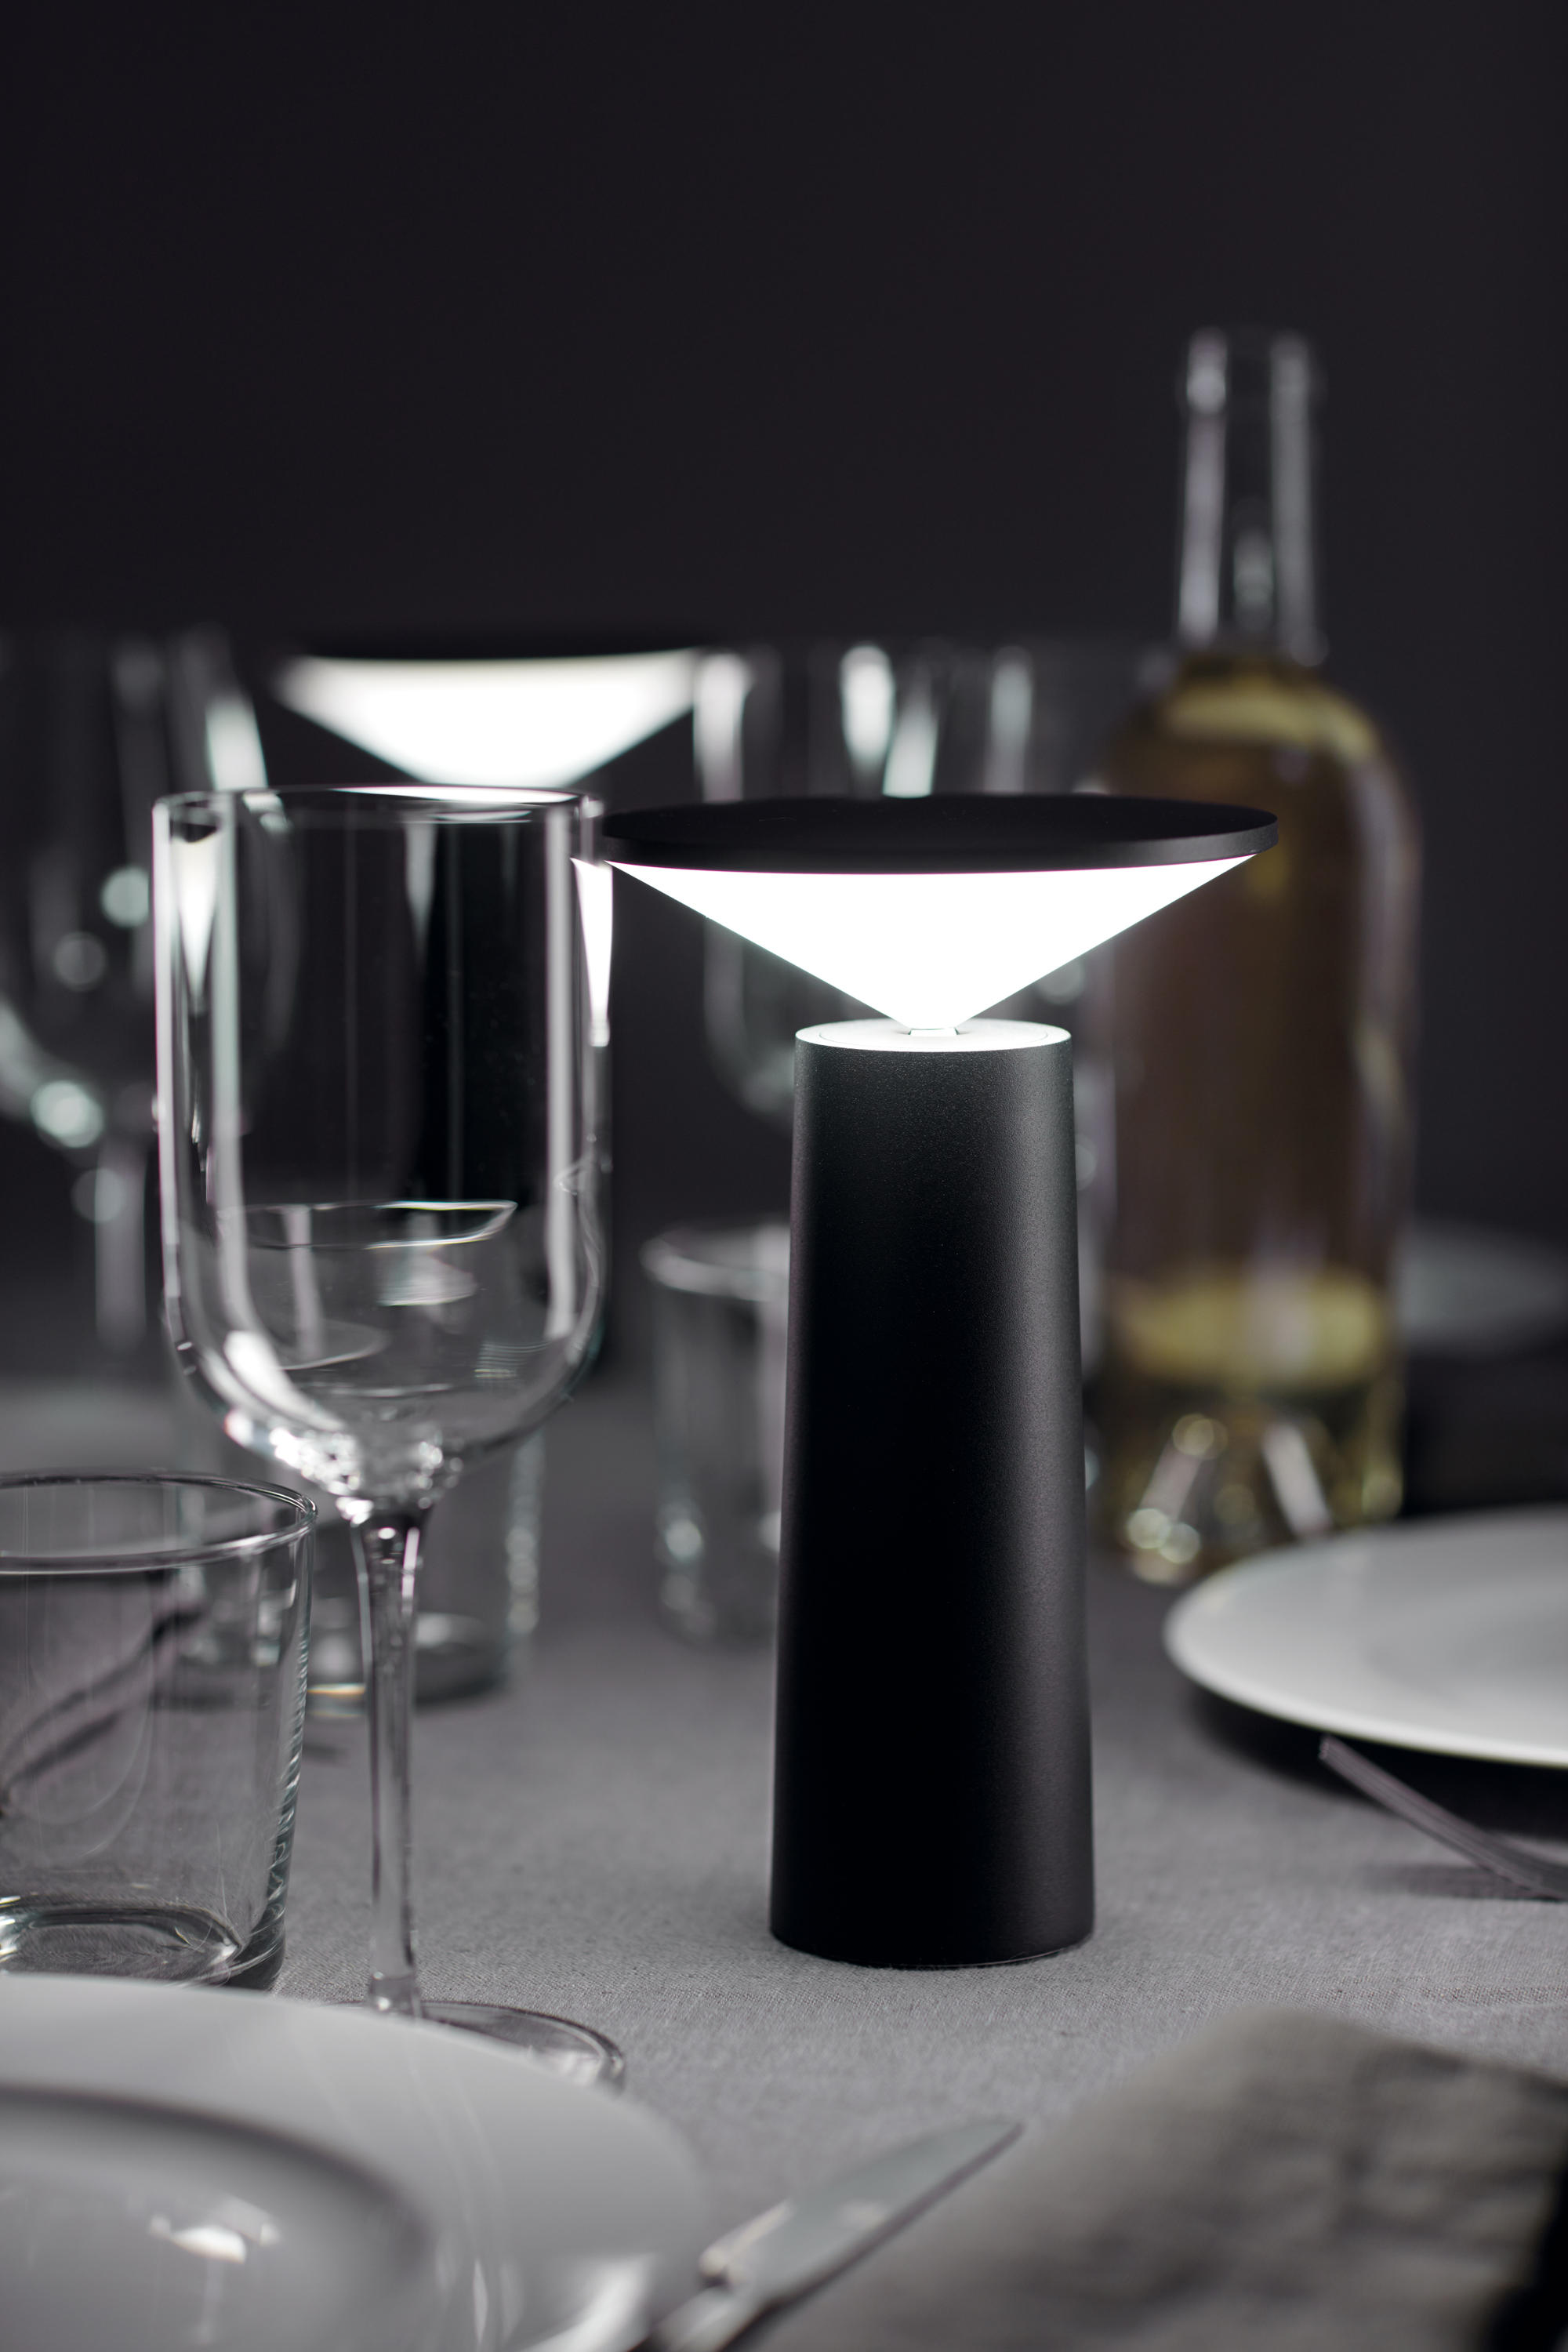 Cocktail Table Lamp by GROK